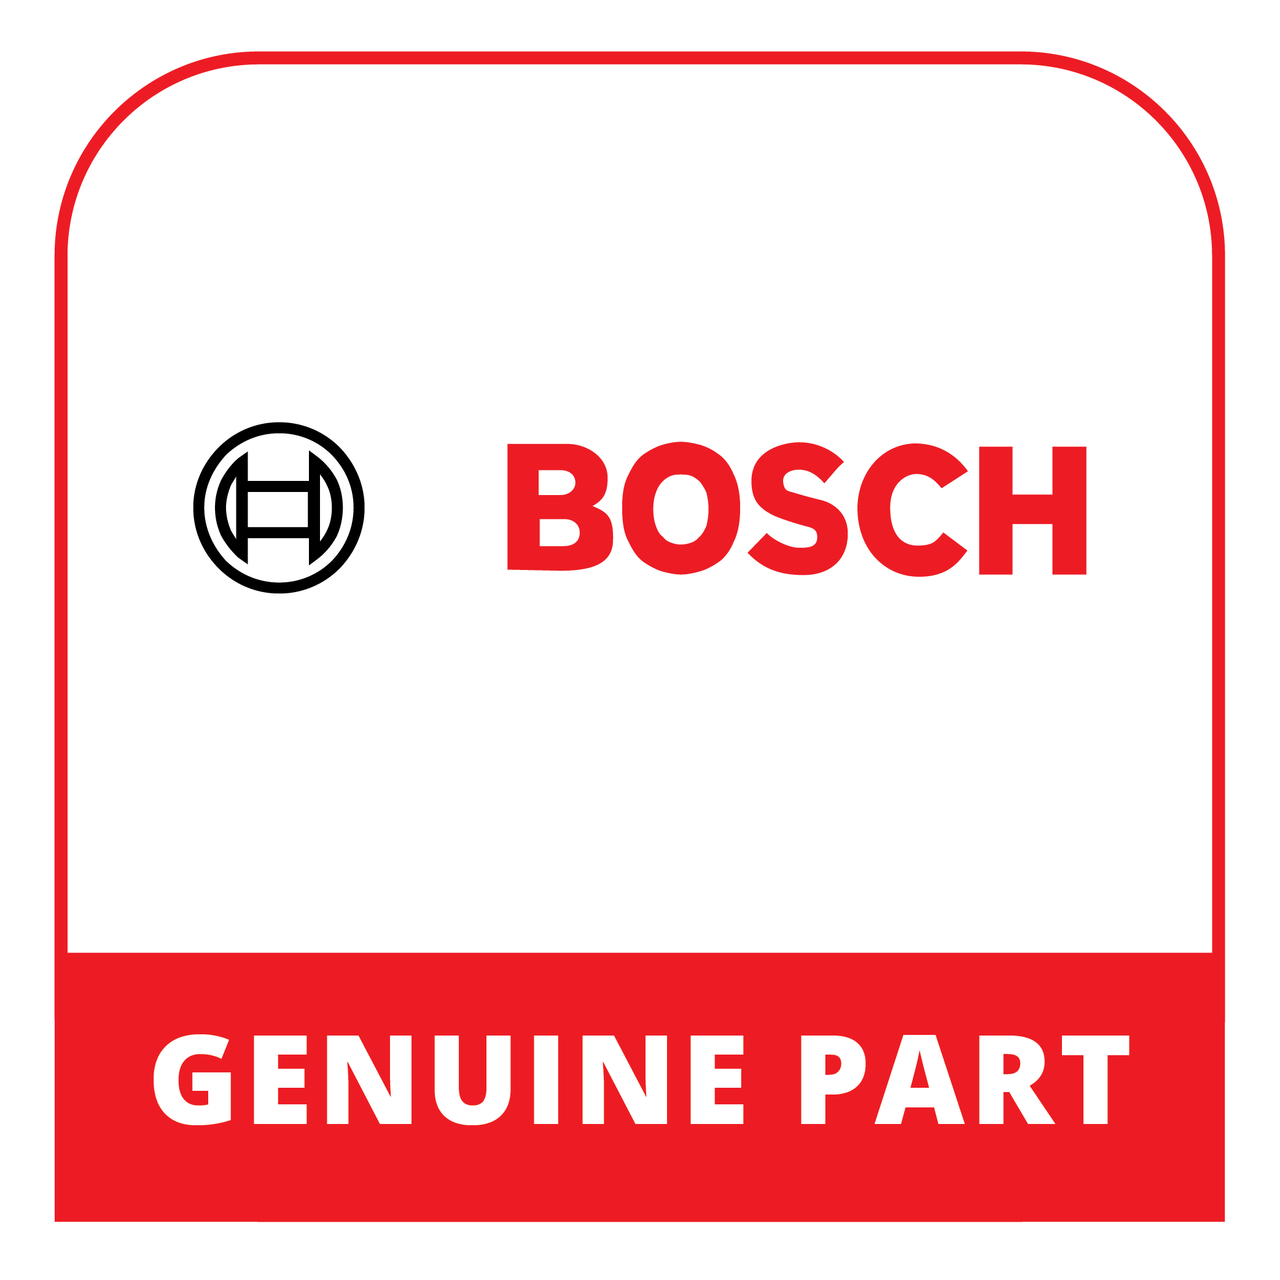 Bosch (Thermador) 12040696 - Cable Harness - Genuine Bosch (Thermador) Part